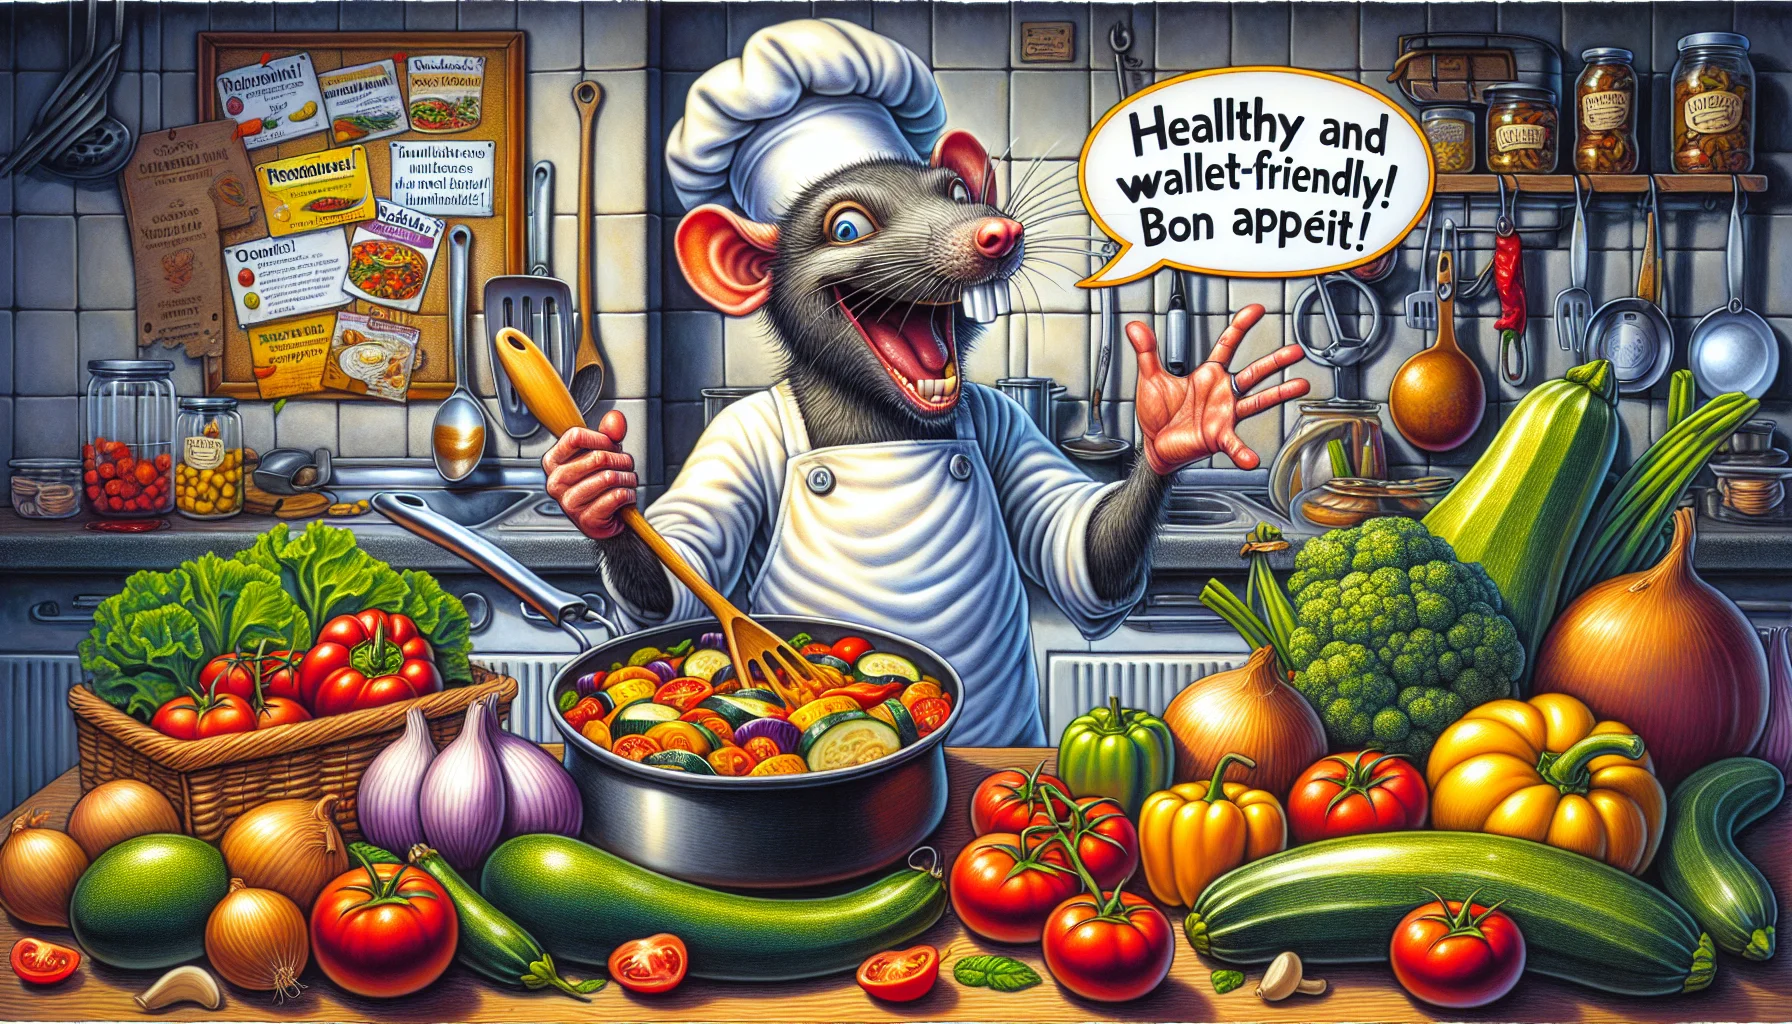 A creative interpretation of a humorous scene in a kitchen where a humanoid rat chef, wearing a white apron and a chef's hat, is jovially cooking a traditional French Ratatouille recipe. Key ingredients like tomatoes, bell peppers, zucchinis, eggplant, and onions are visible, as well as some inexpensive kitchen utensils. The chef's expression is one of delight and excitement, with a playful, inviting aura. A speech bubble from the chef exclaims, 'Healthy and wallet-friendly! Bon Appétit!'. This image should be detailed, vibrant, and engaging, nudging people to opt for healthier, budget-friendly meal options.